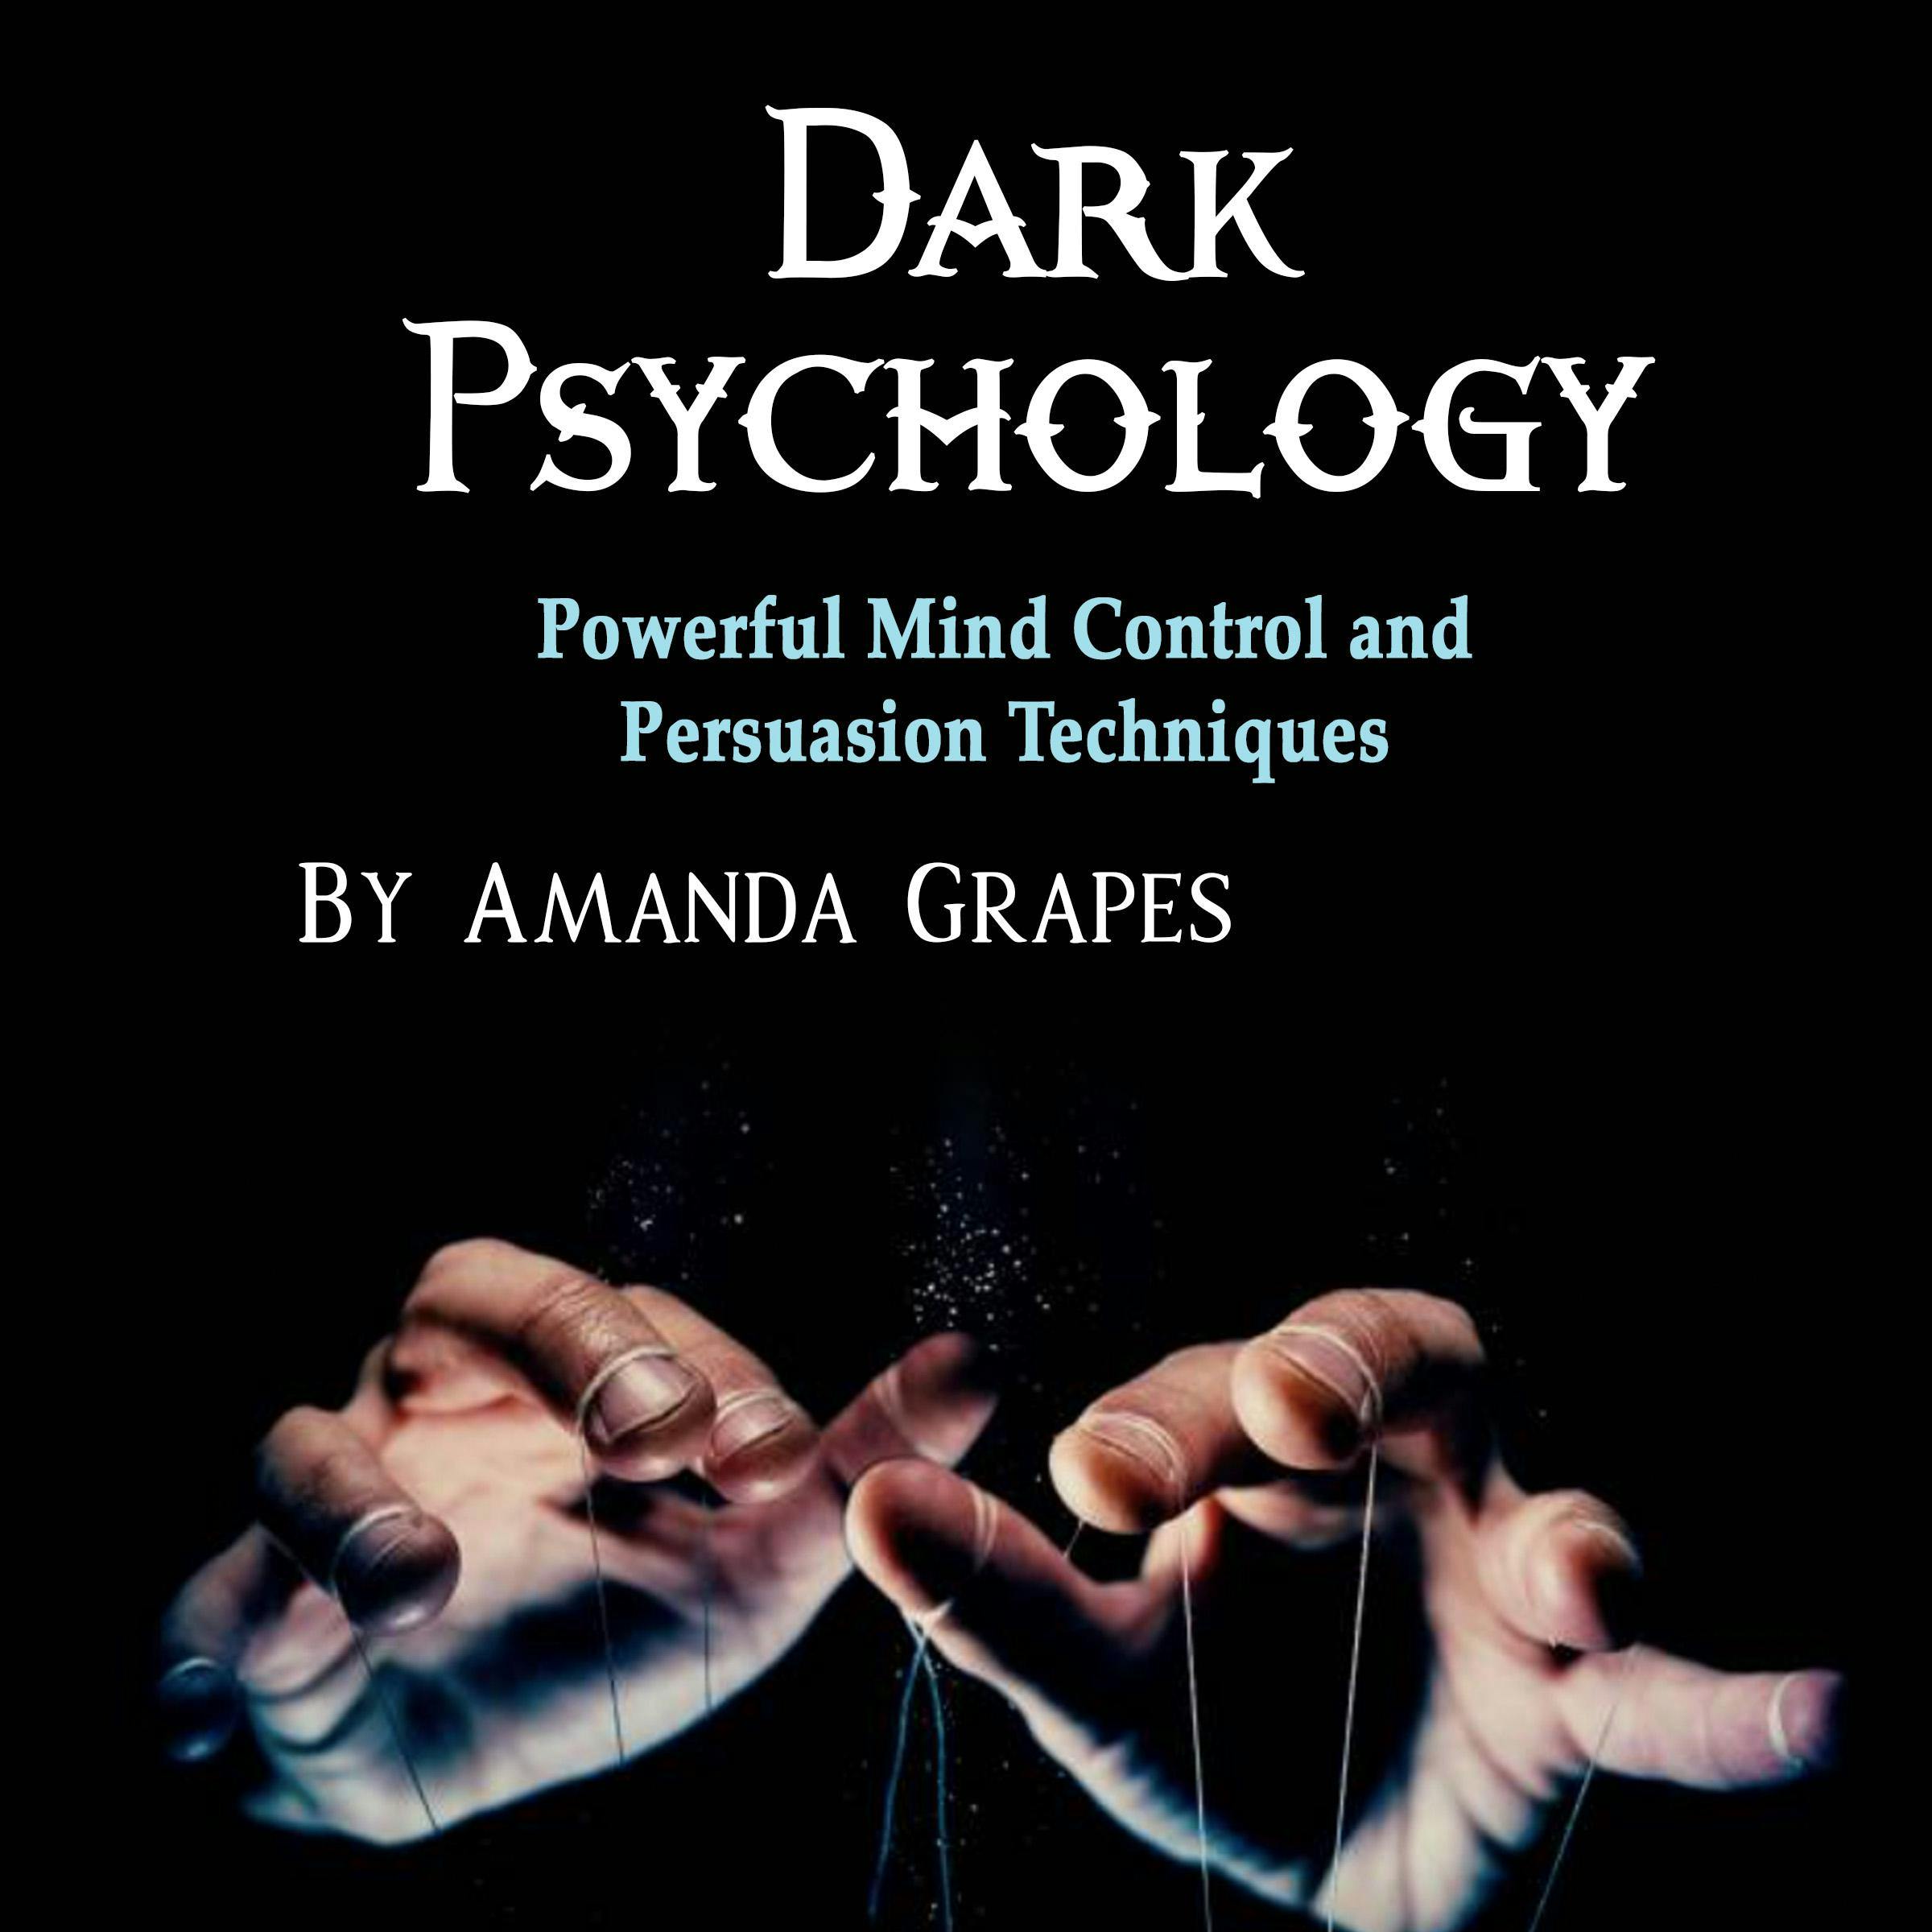 Dark Psychology: Powerful Mind Control and Persuasion Techniques - Amanda Grapes